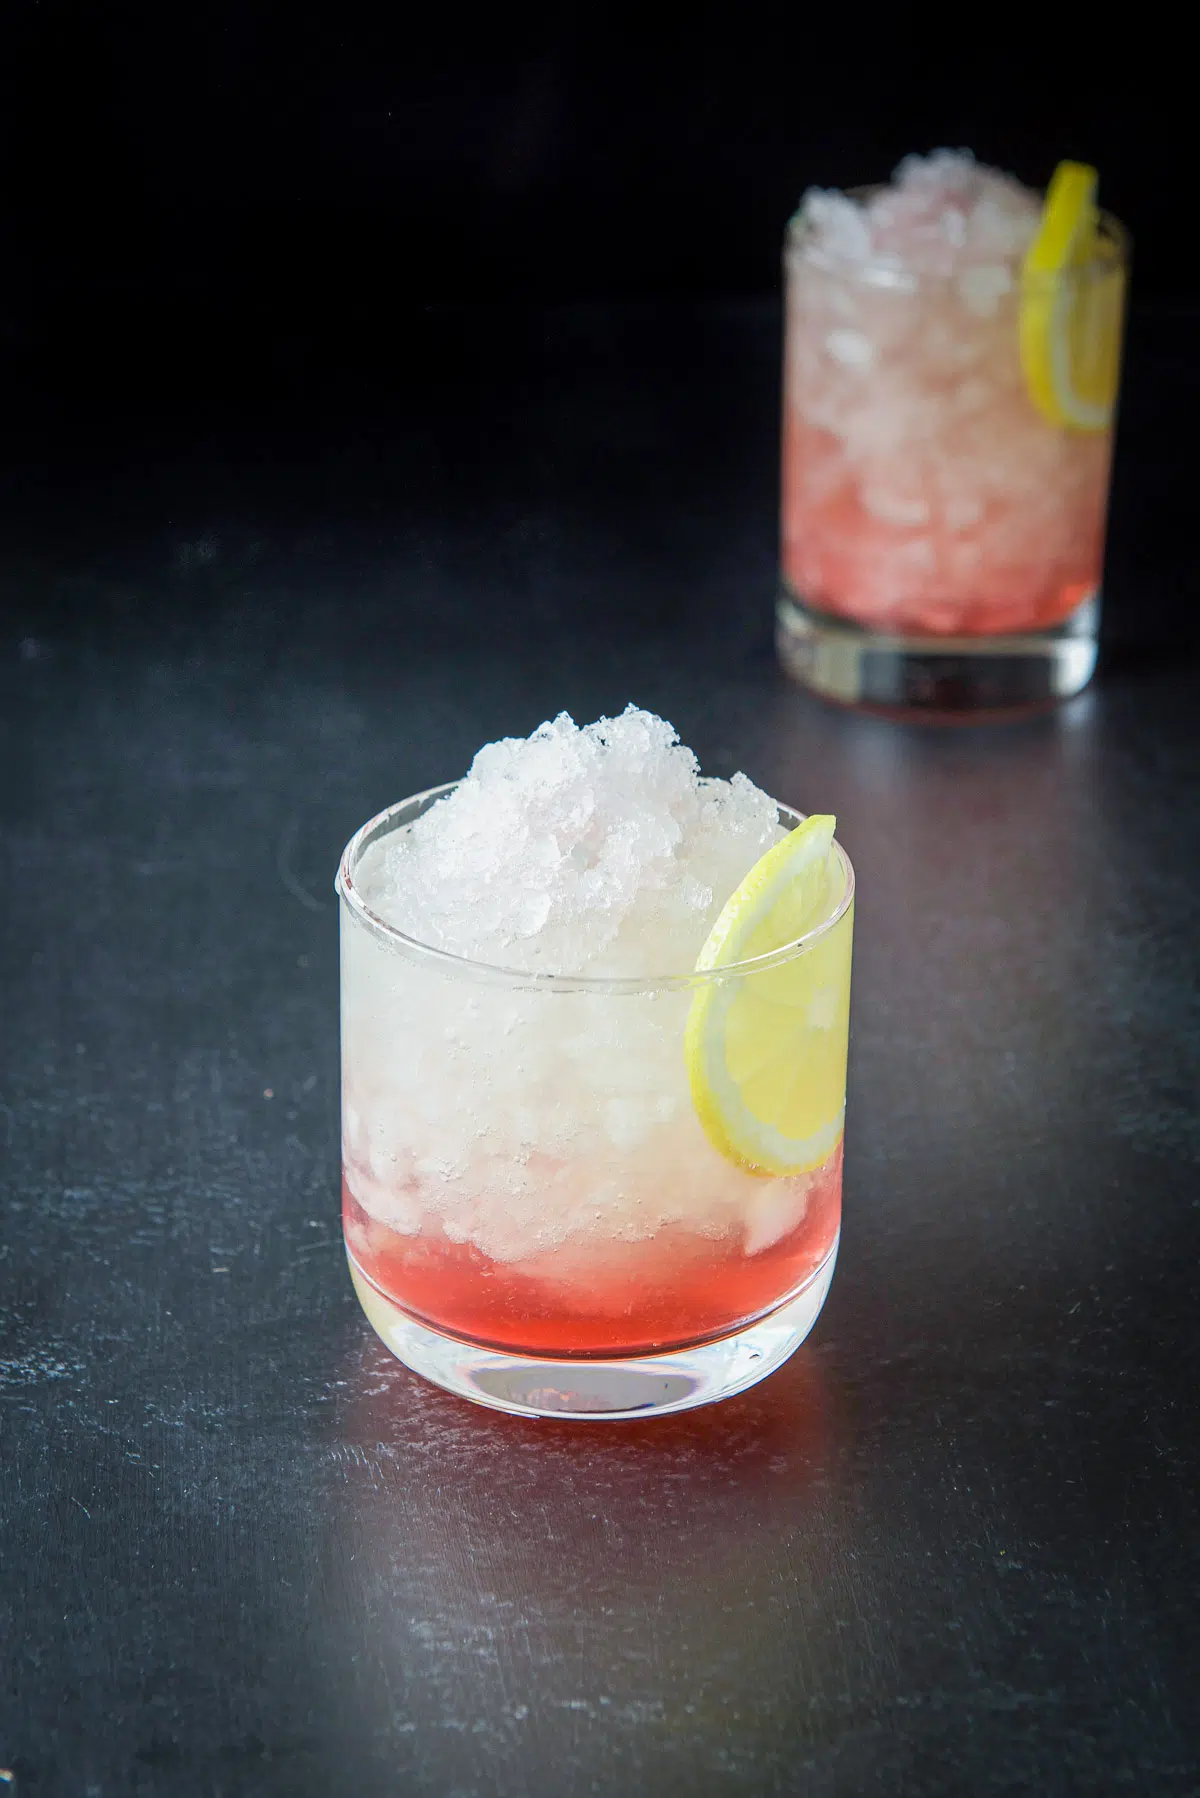 Short glass filled with ice, a red cocktail and lemon slice